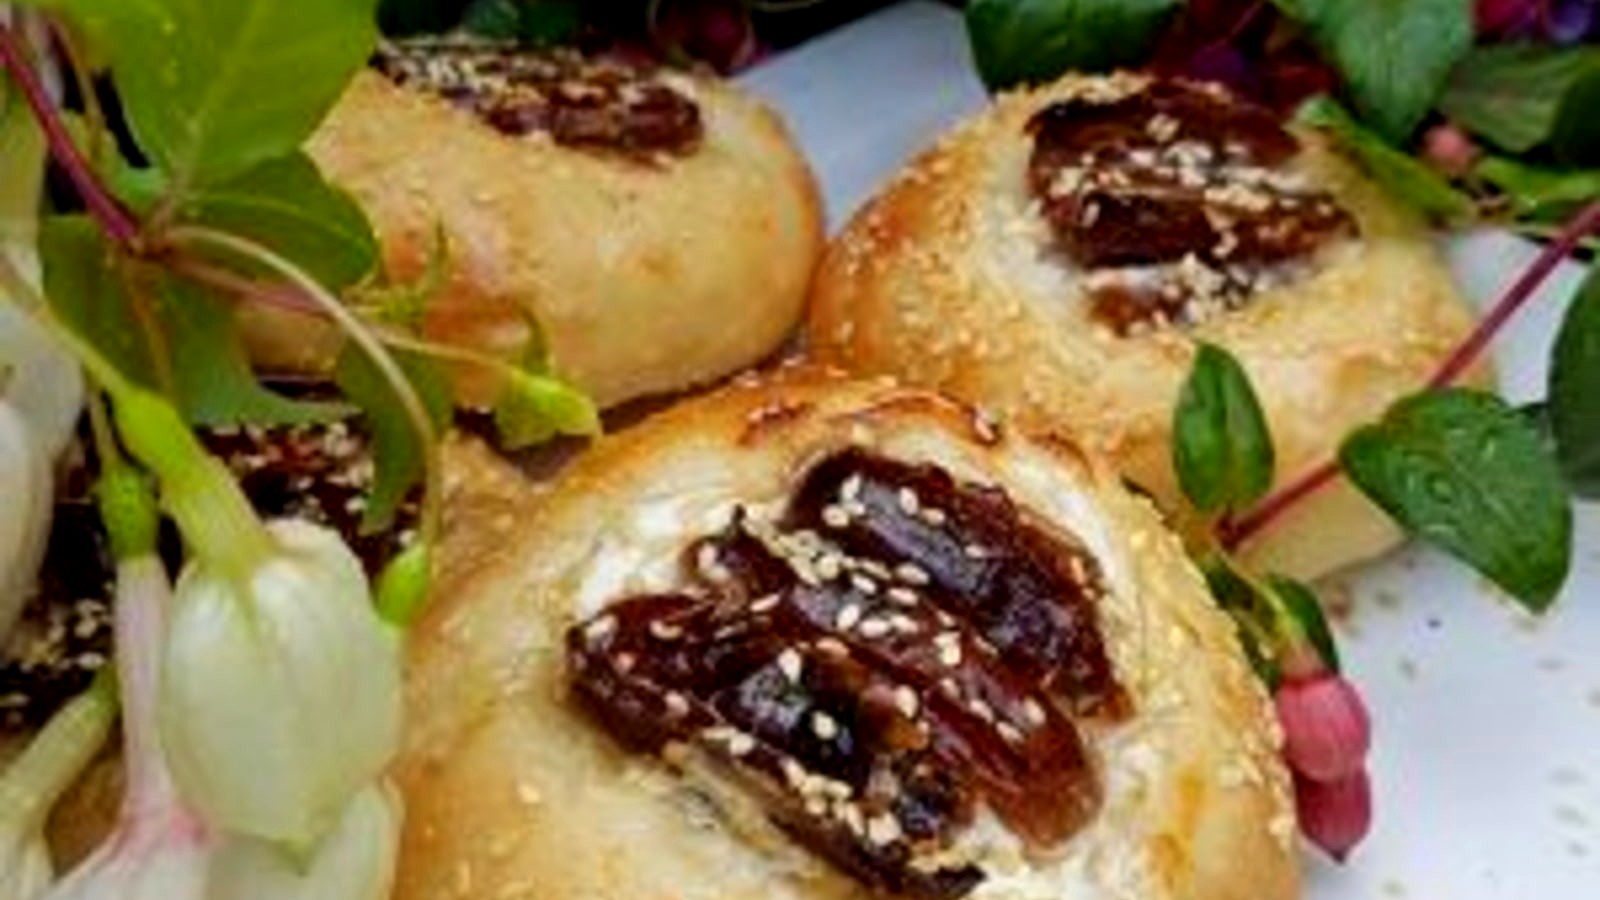 Image of Bialy Stuffed with Yoghurt and Dates